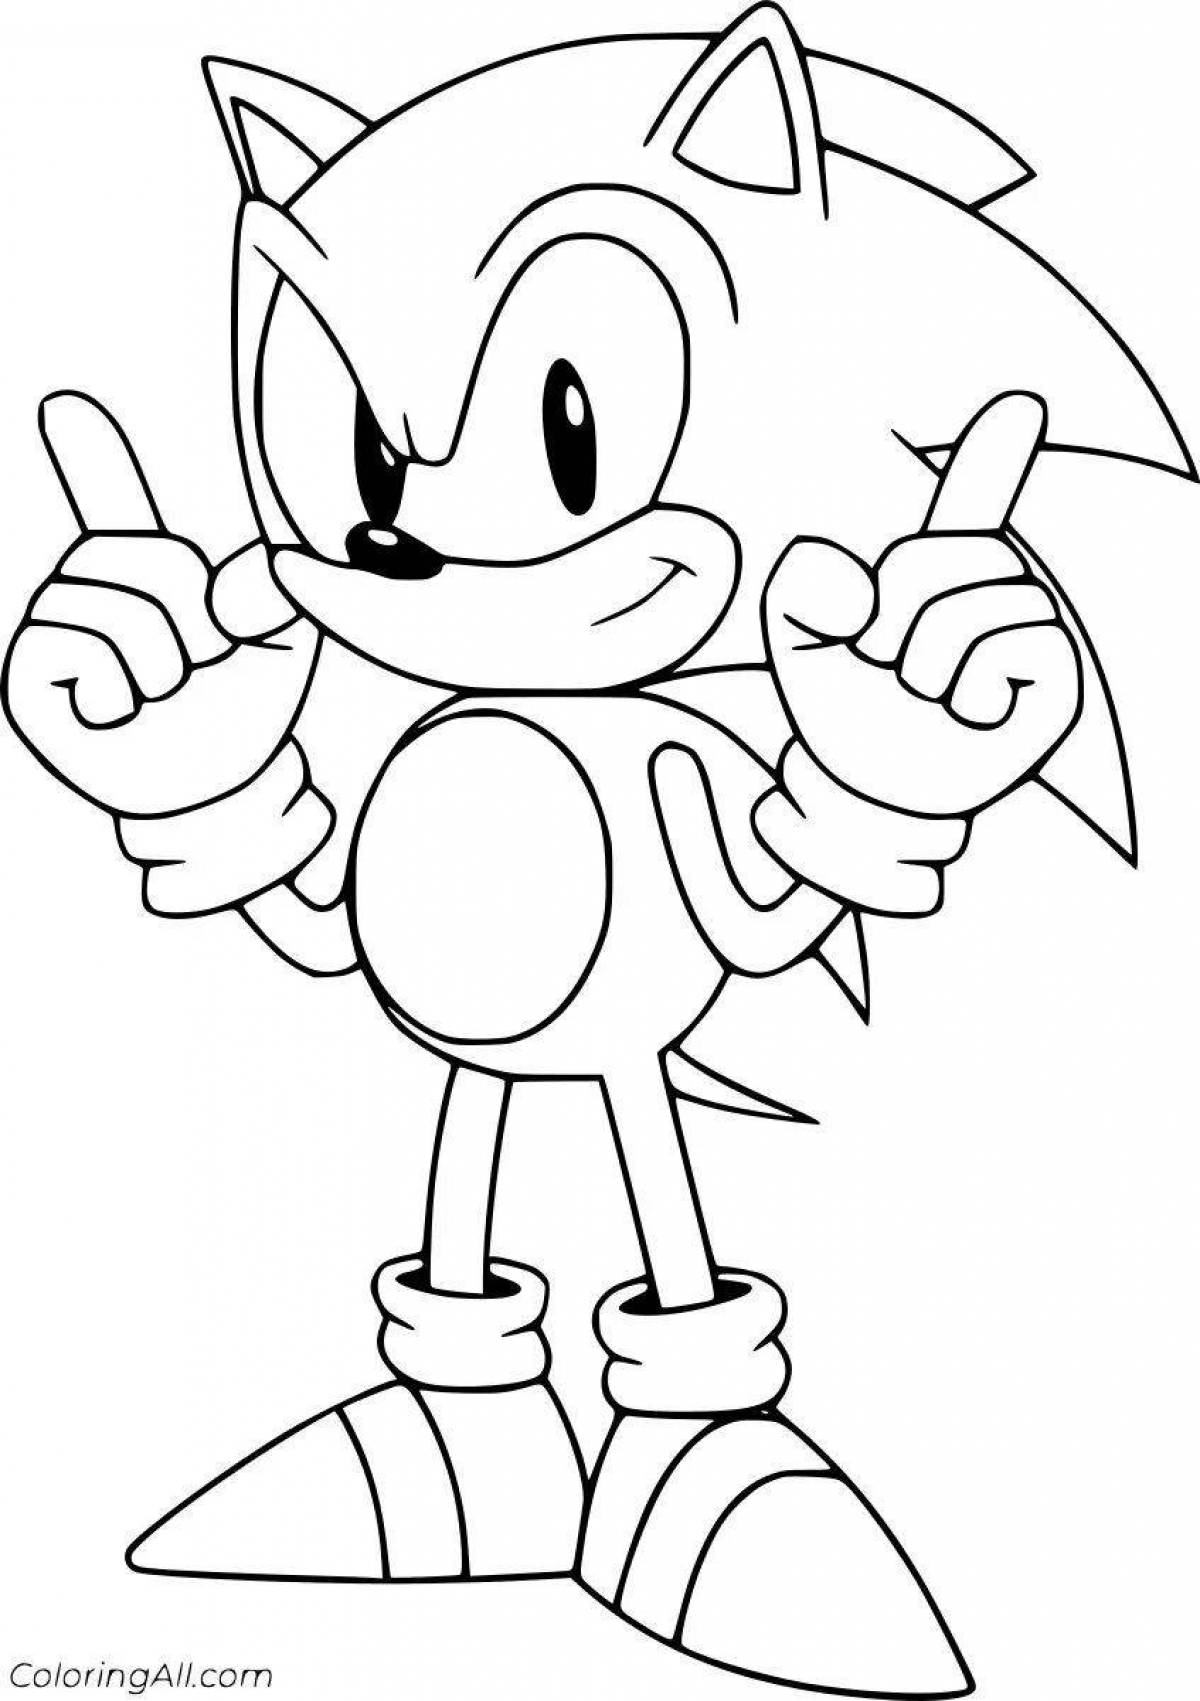 Innovative sonic exe coloring book for kids